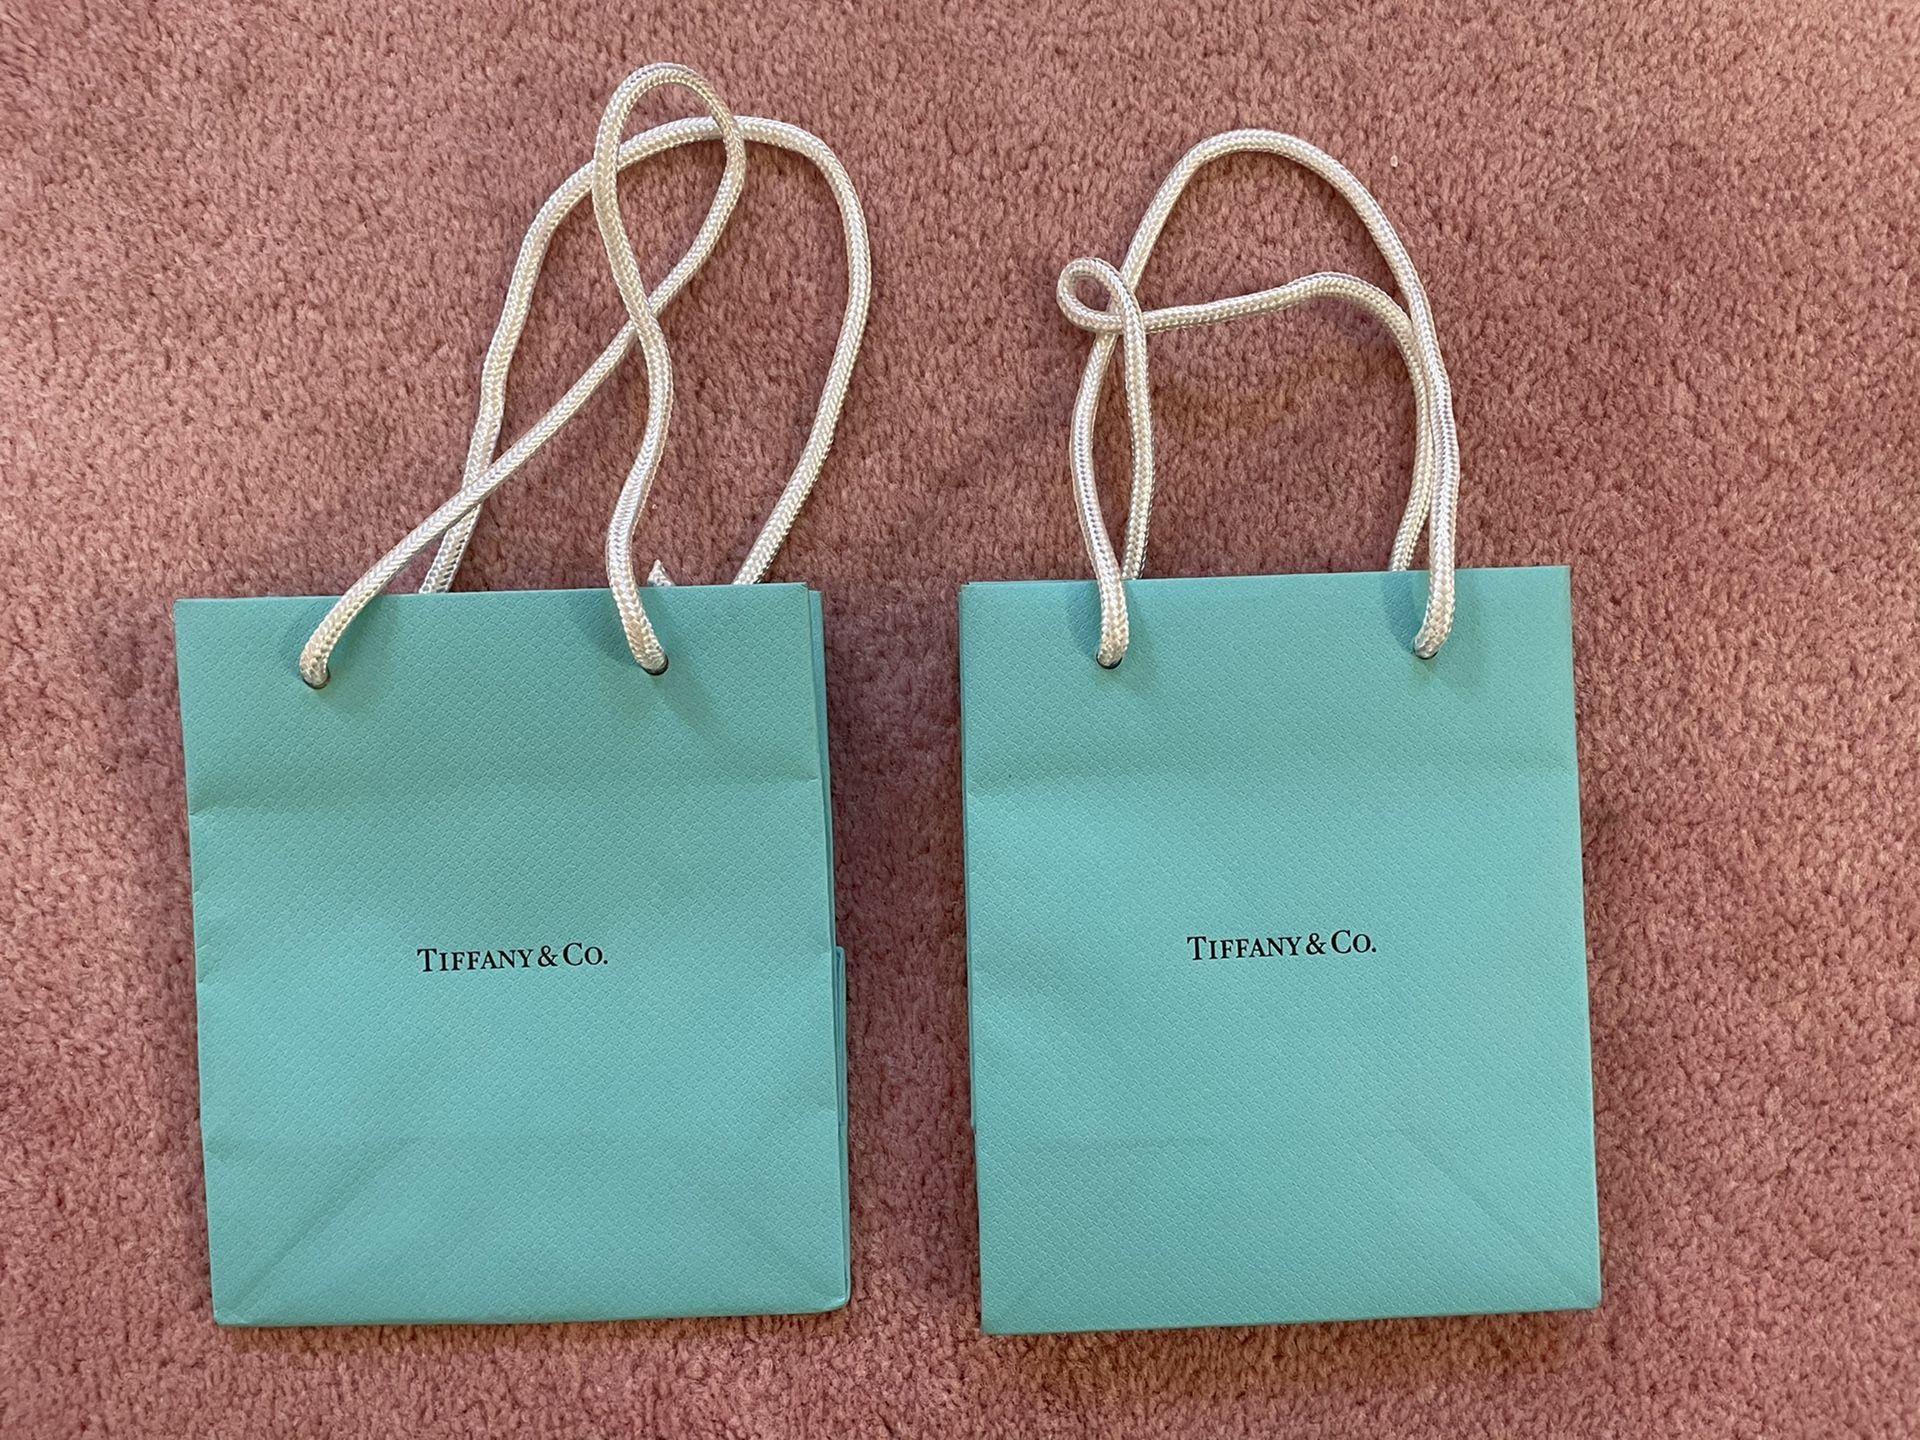 Small Tiffany & Co. gift bag in good condition